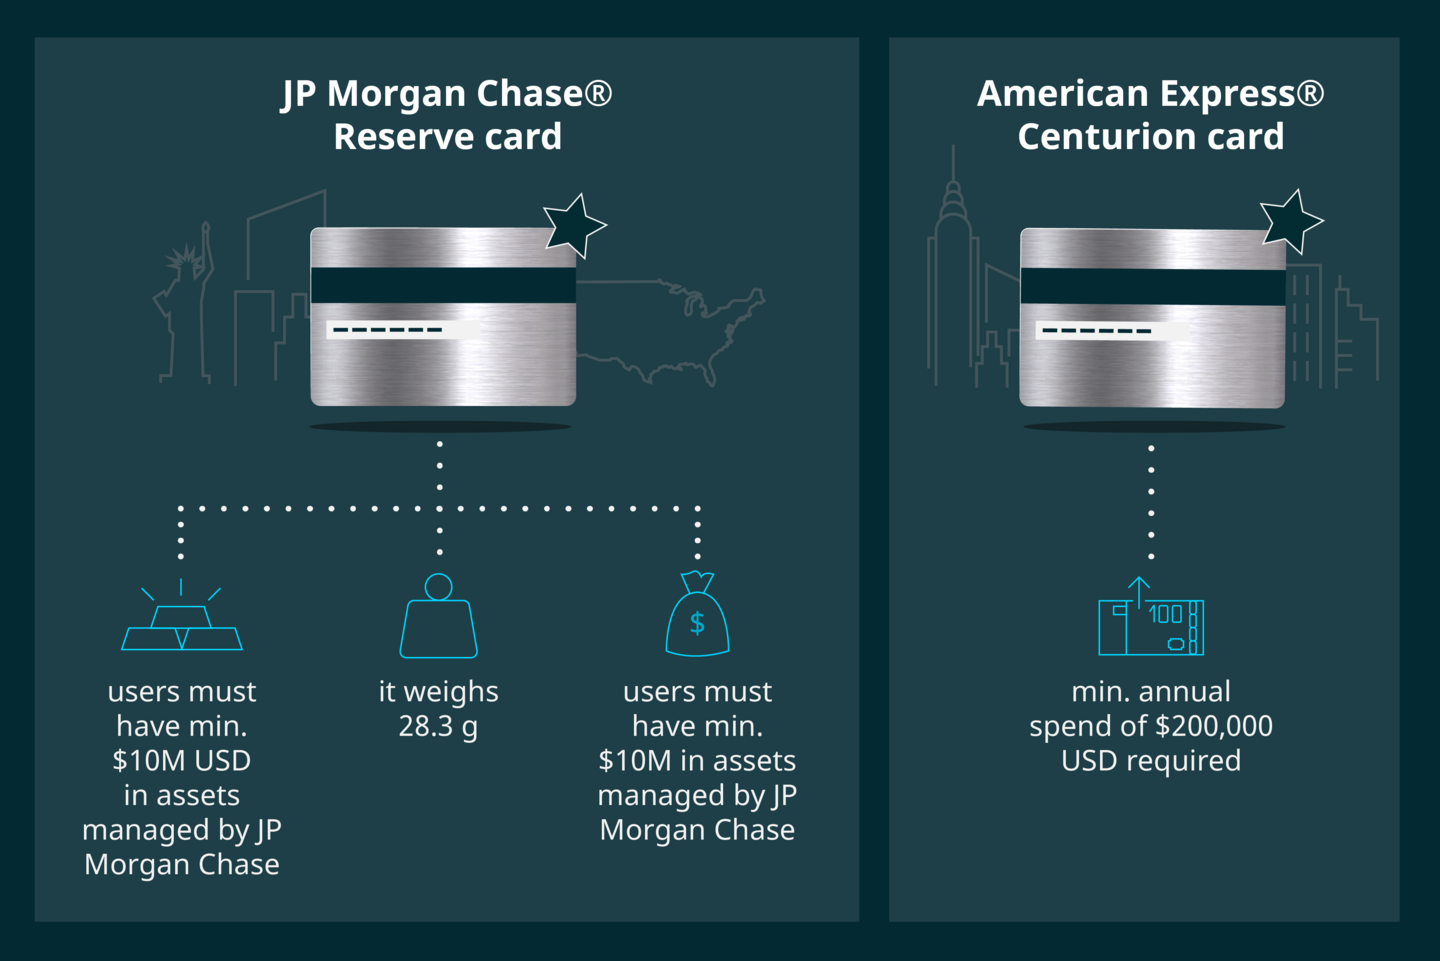 Infographic about JP Morgan Chase Reserve Card compared to American Express Centurion Card